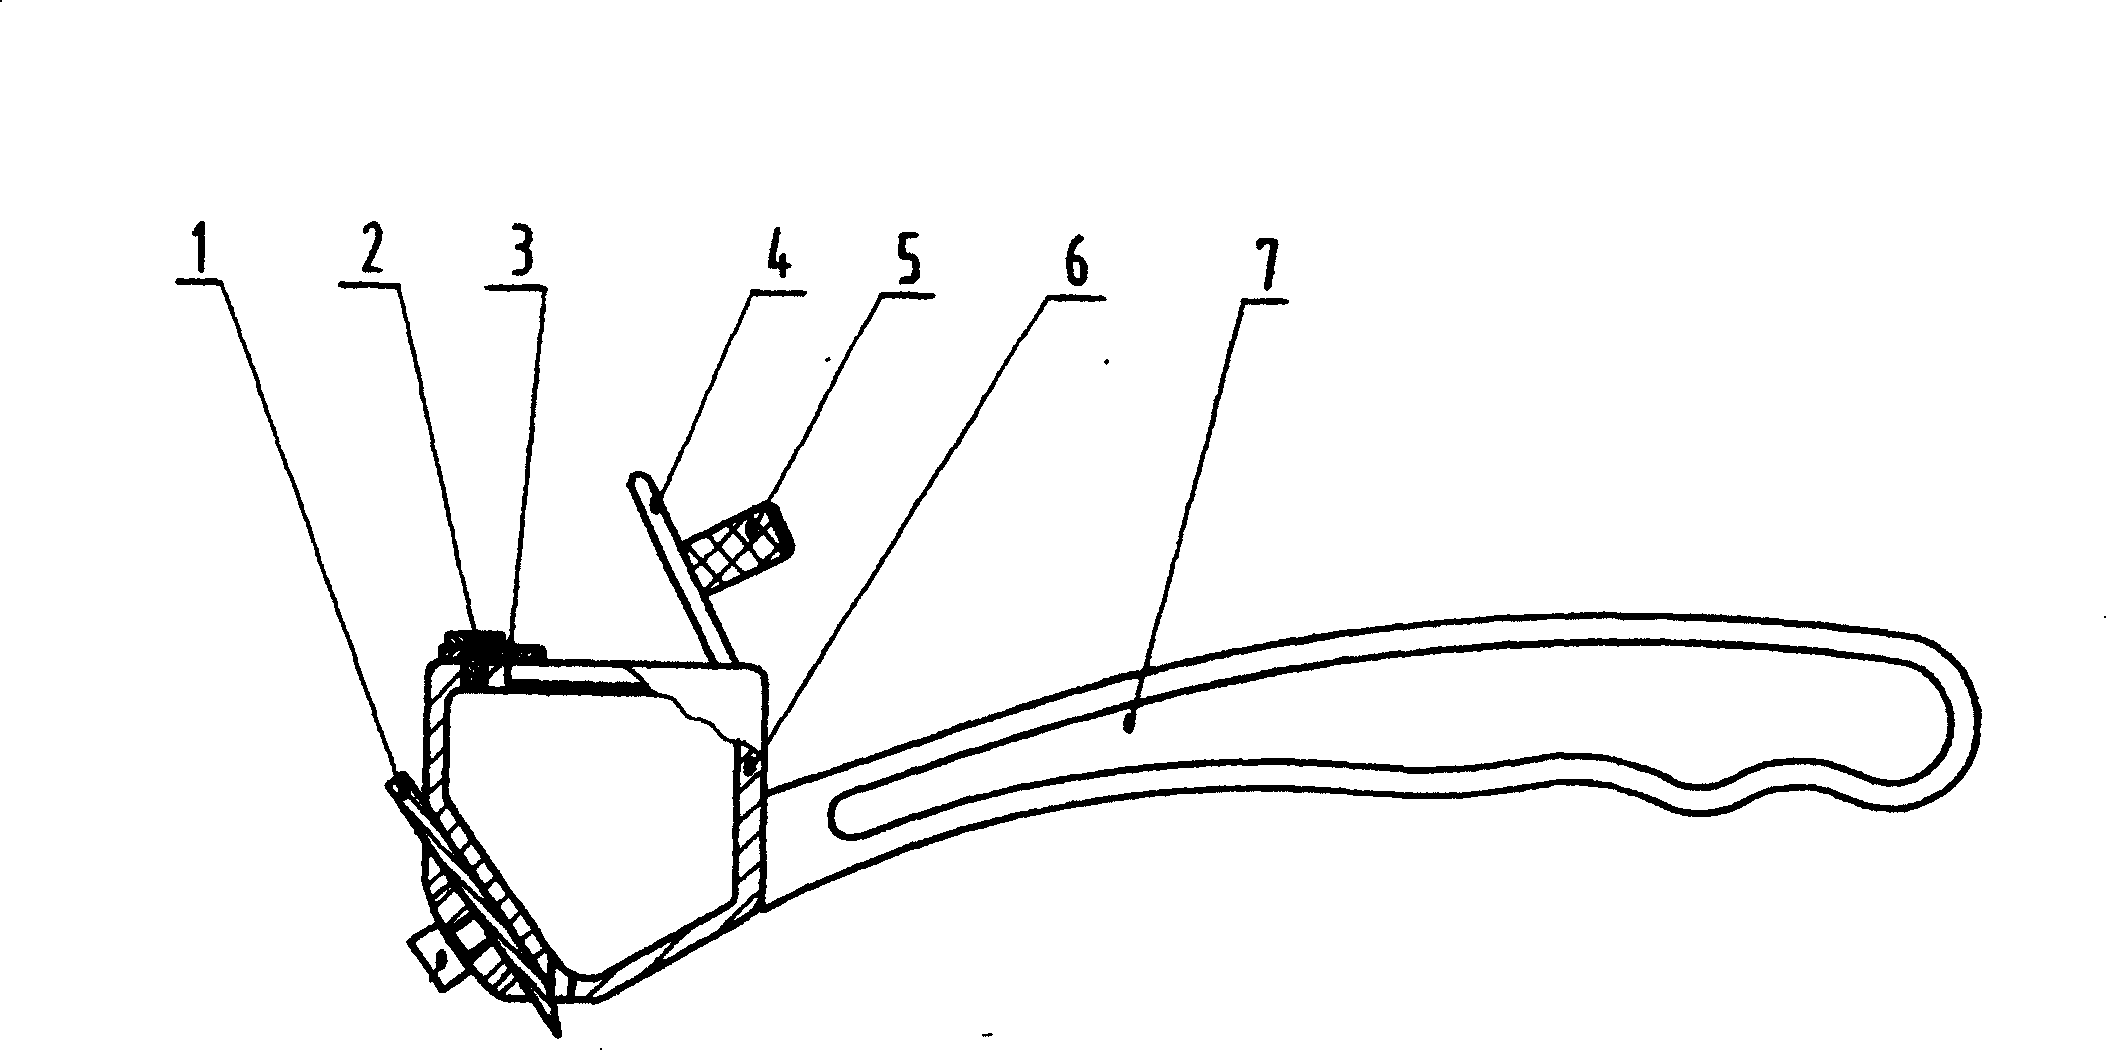 Equipment for live scraping rhinoceros horn, and fabricating method thereof